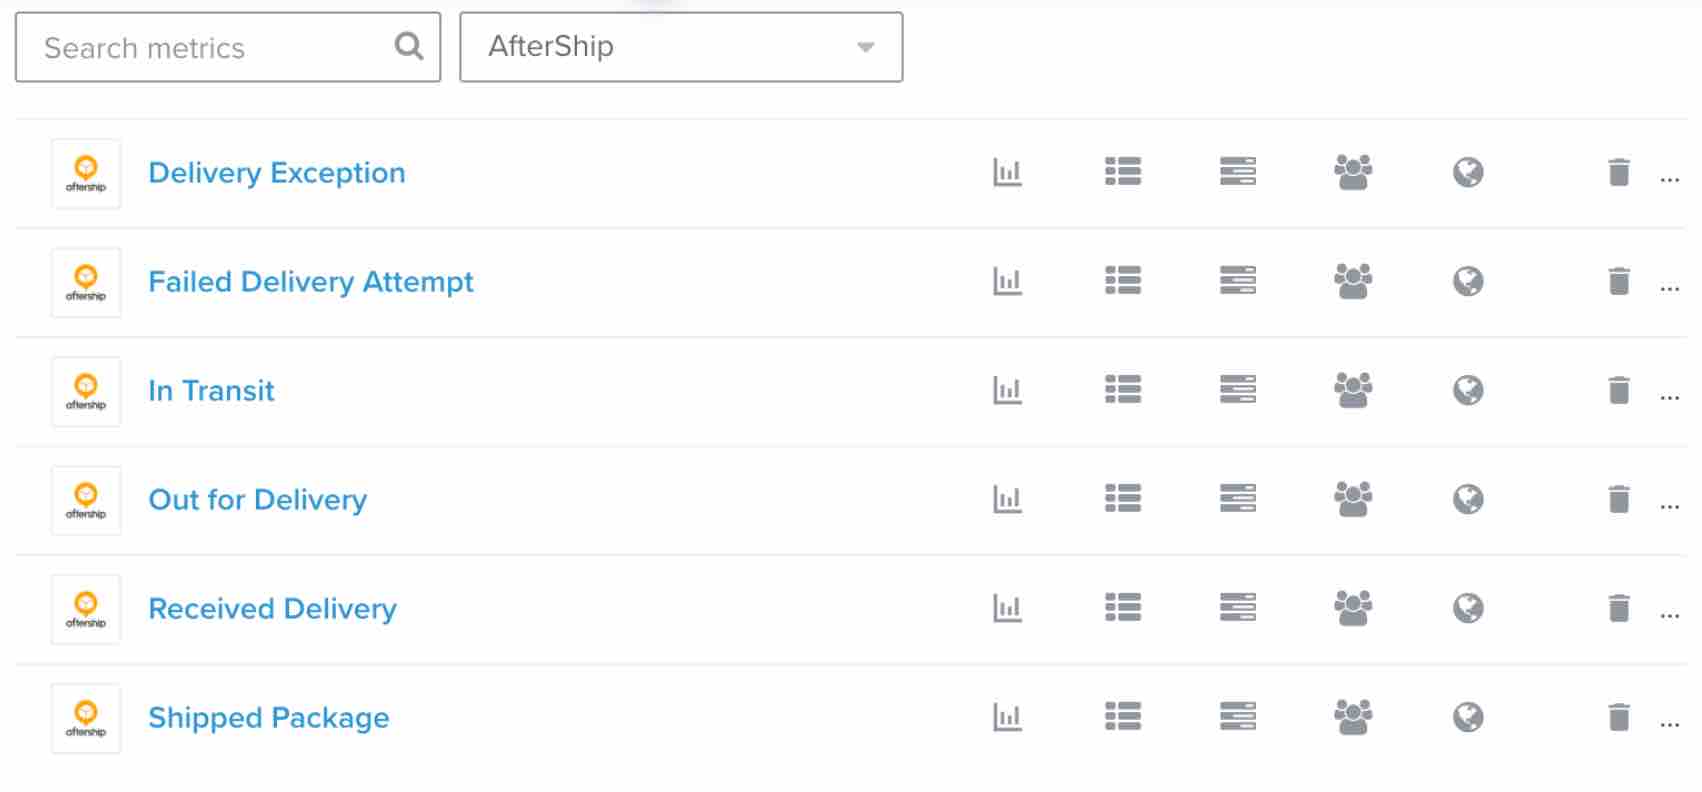 Metrics tab in Klaviyo filtered by AfterShip with a list of metrics including Delivery Exception and Shipped Package